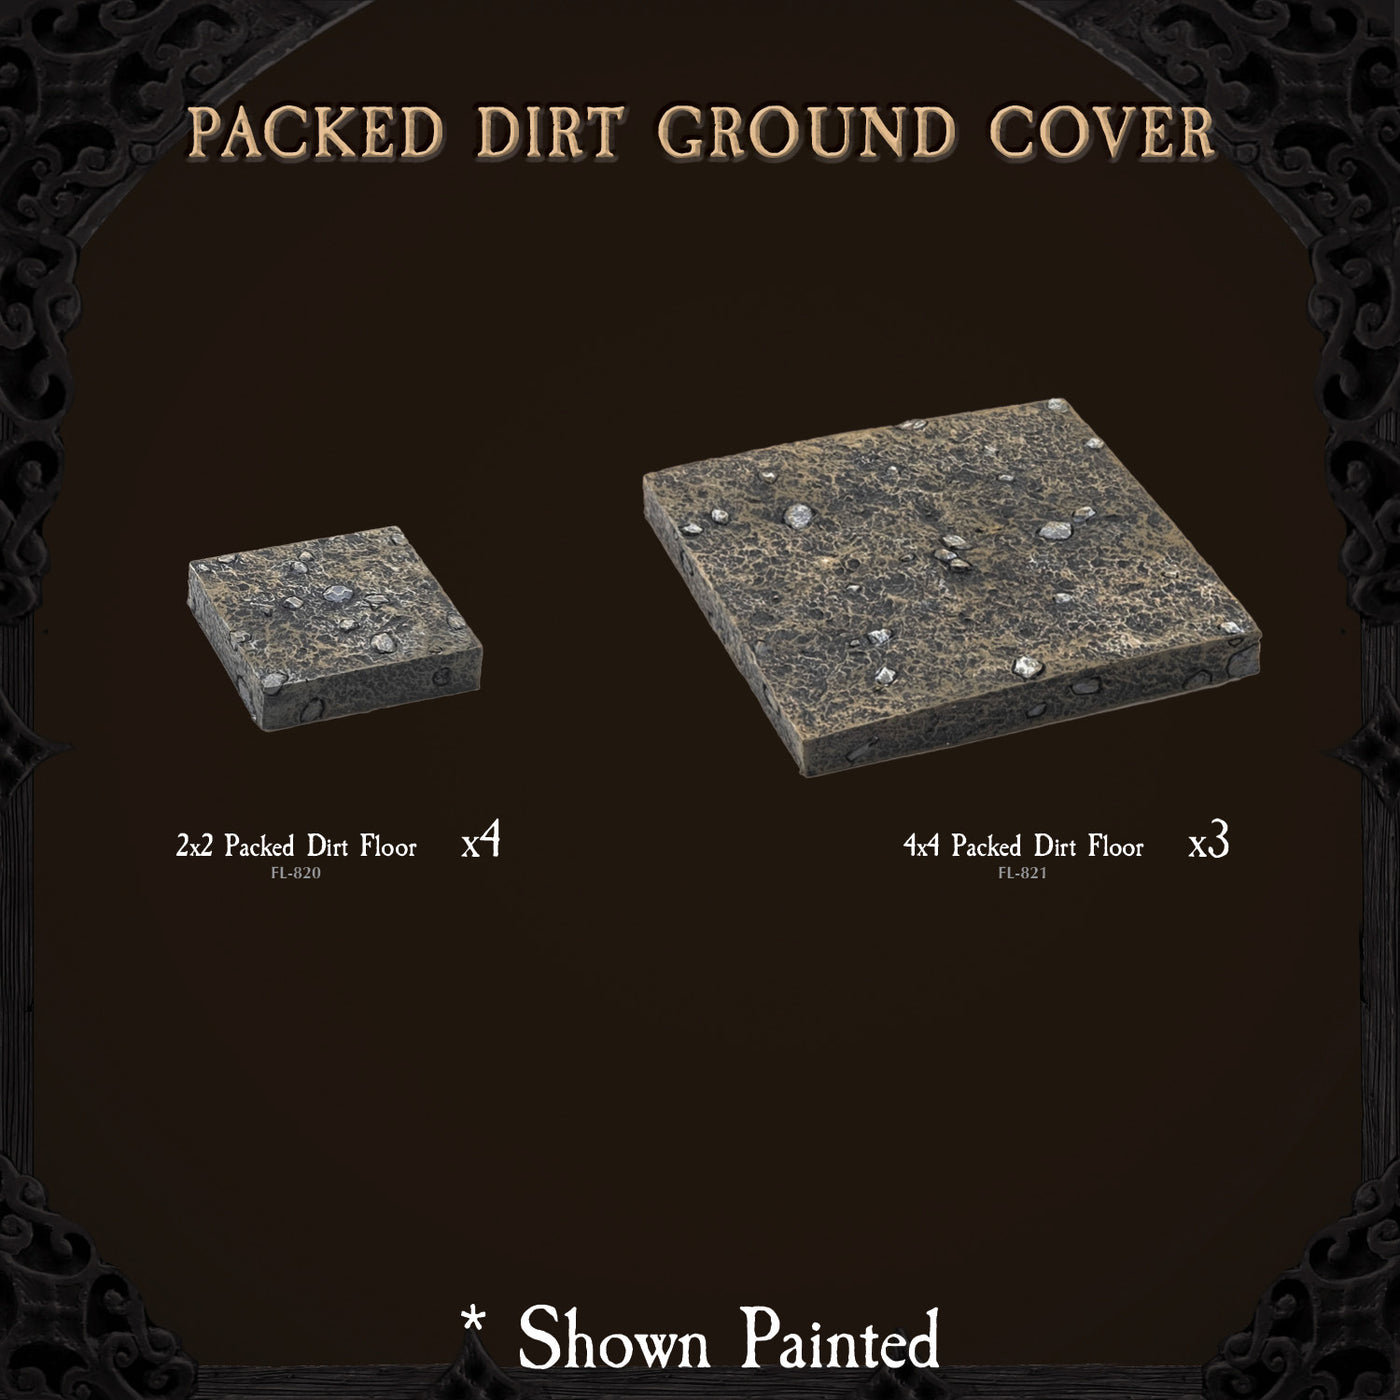 Packed Dirt Ground Cover (Unpainted)